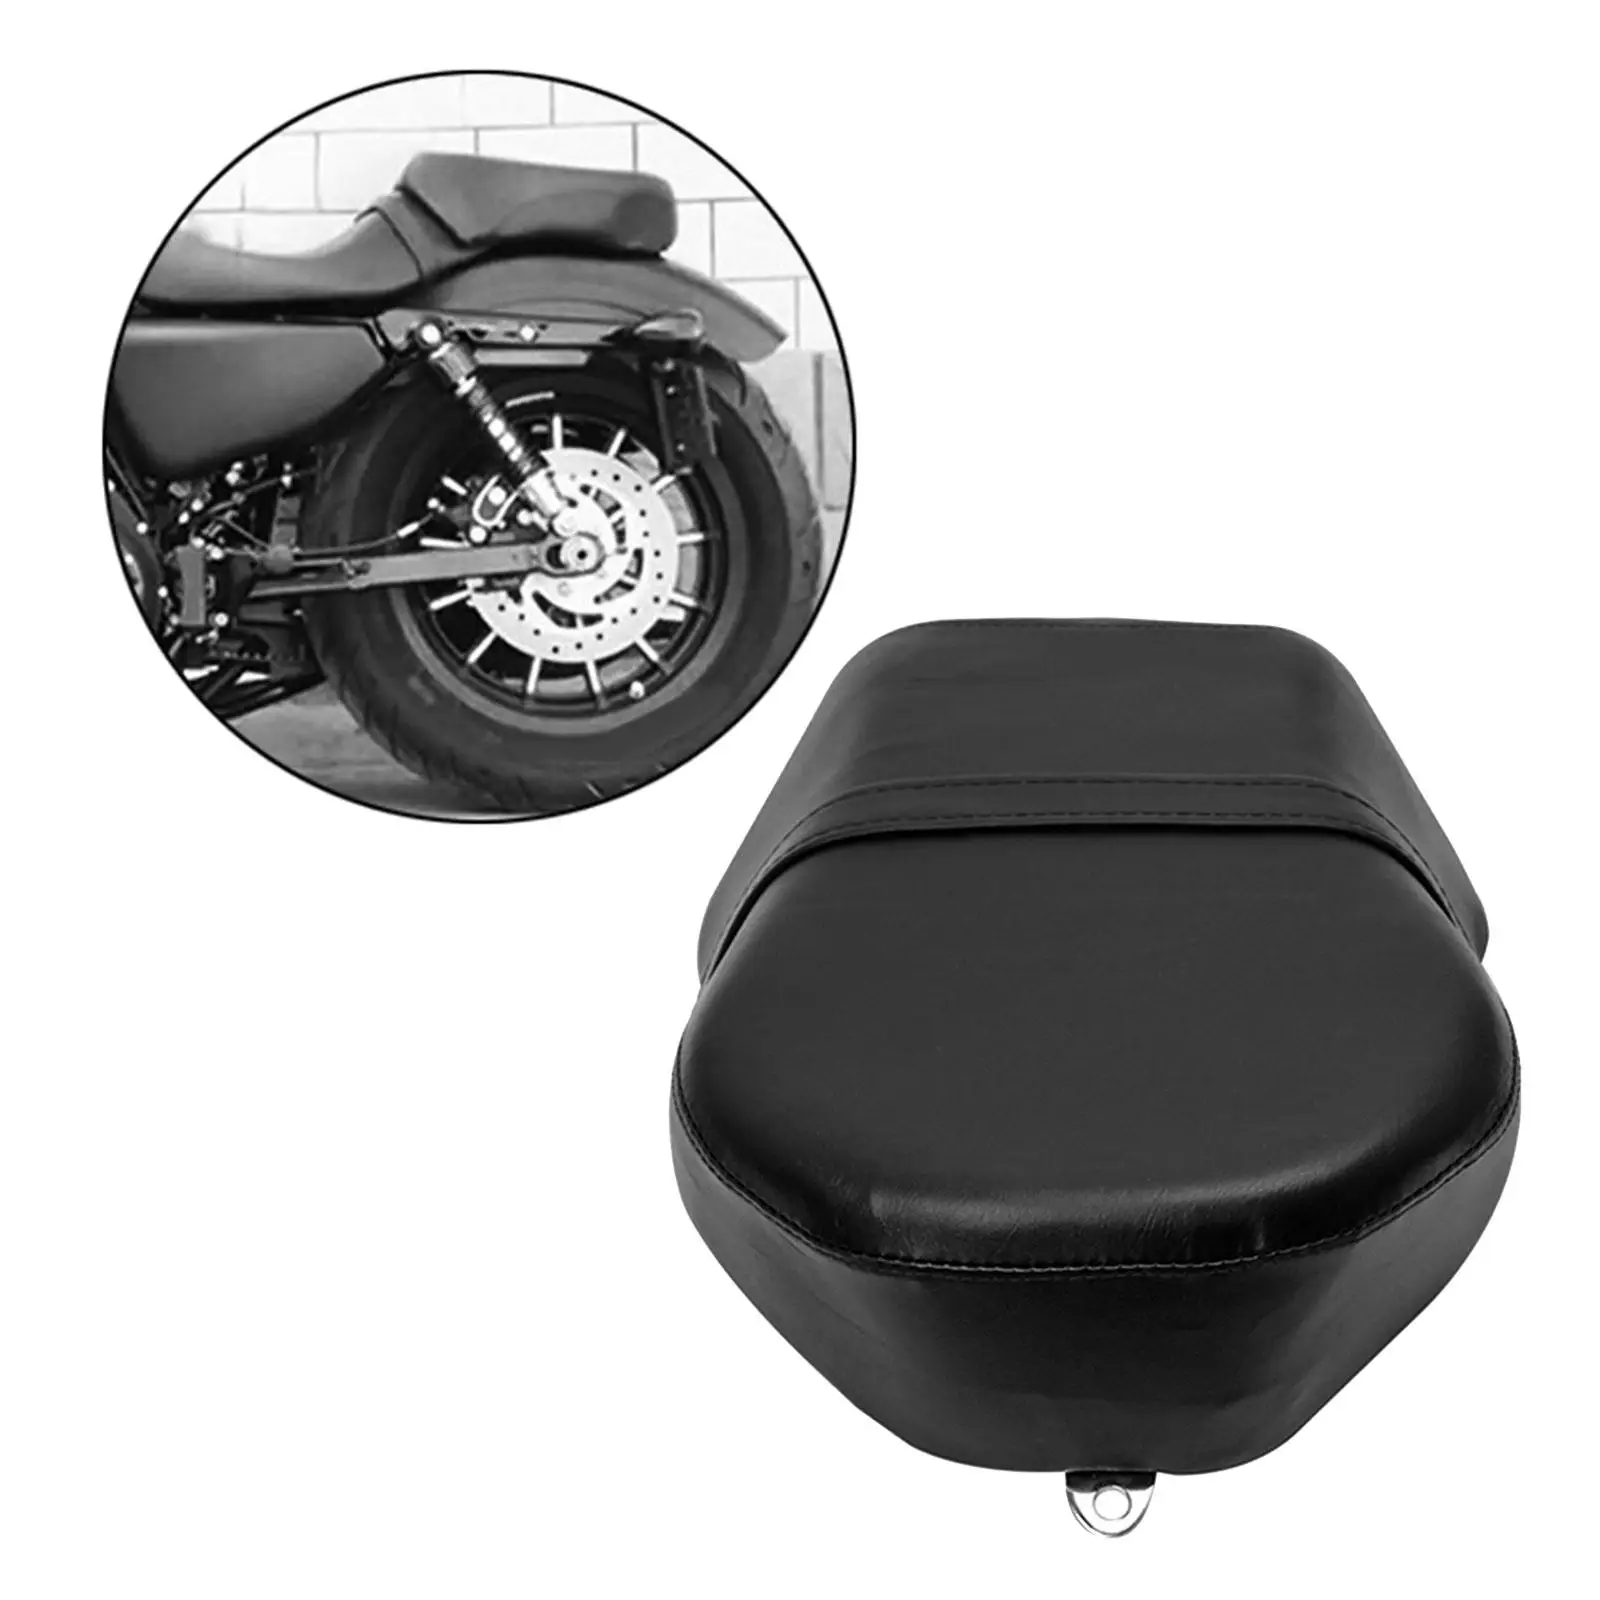 Motorcycle Pillion Passenger Pad Motorcycle Passenger Seat Cushion for Harley Sportster 883 1200 Direct Replaces Durable